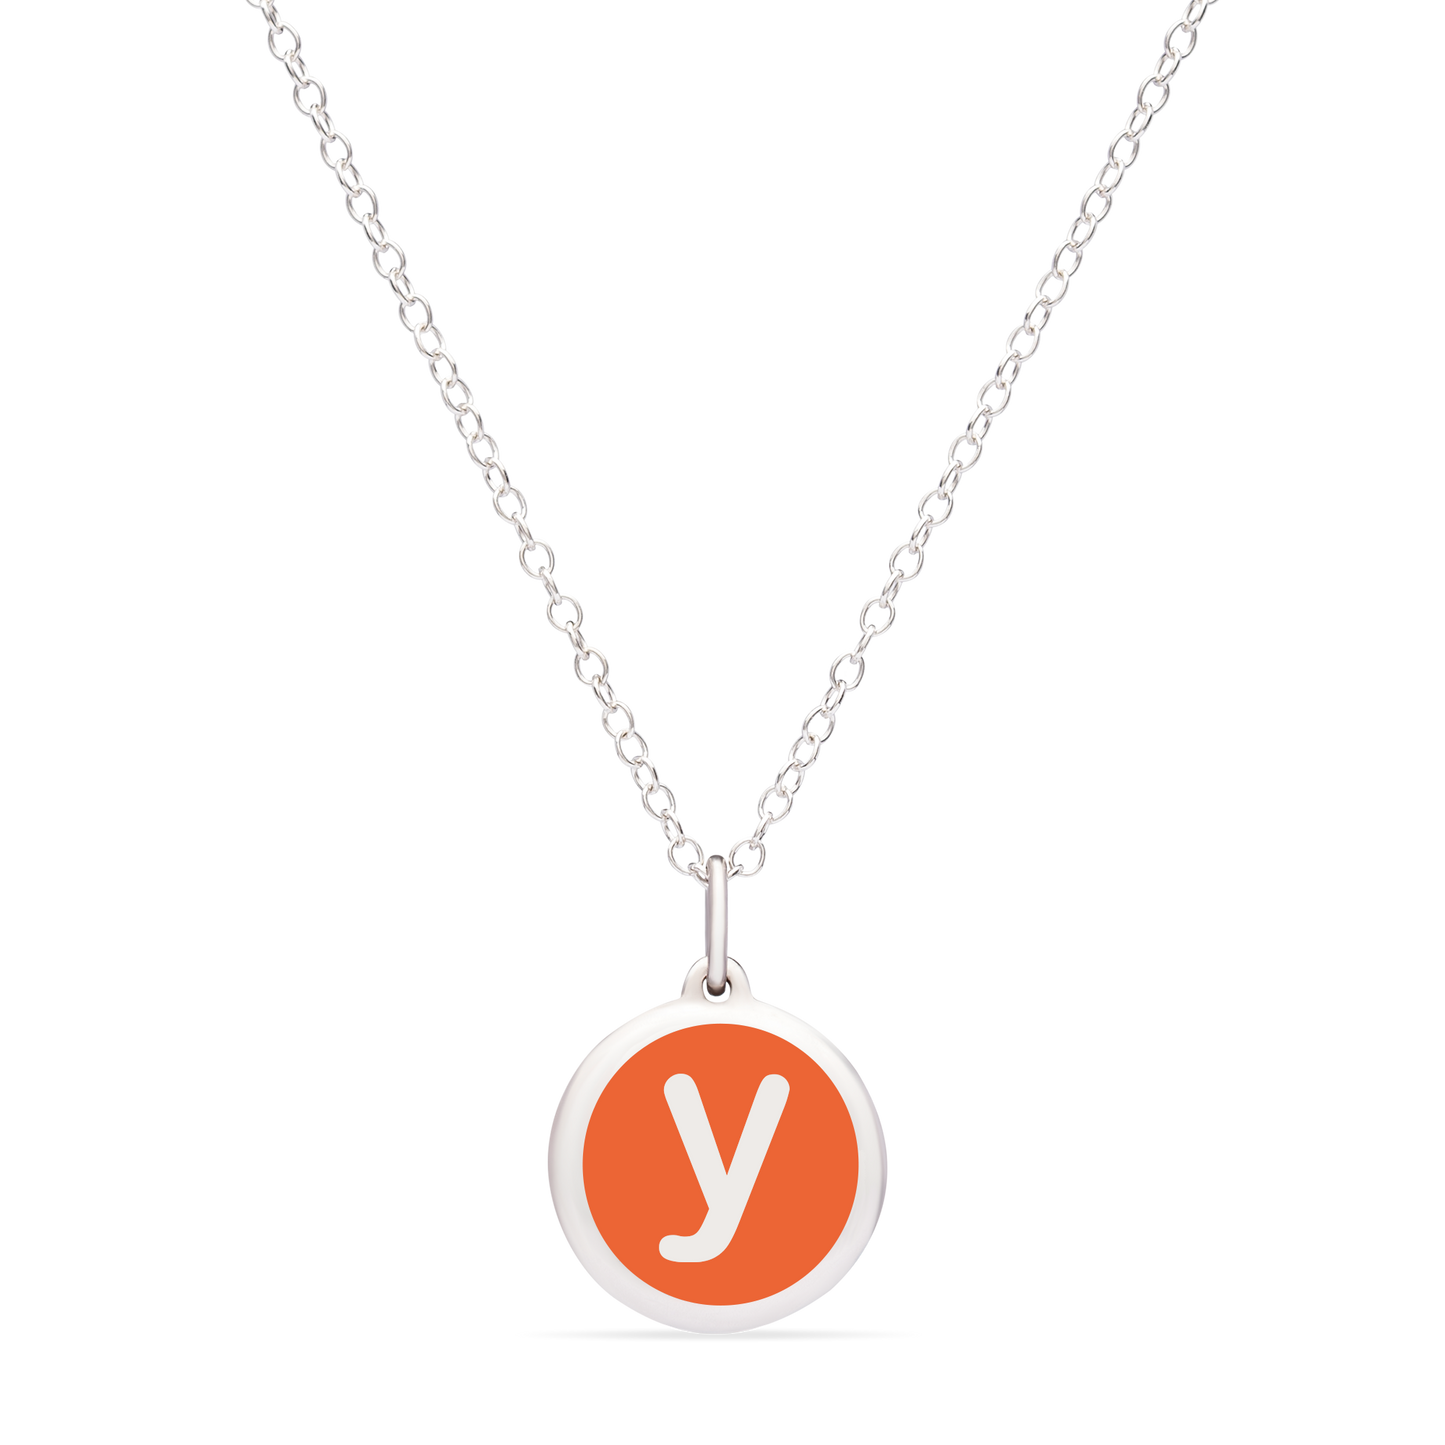 MINI INITIAL 'y' CHARM sterling silver with rhodium plate